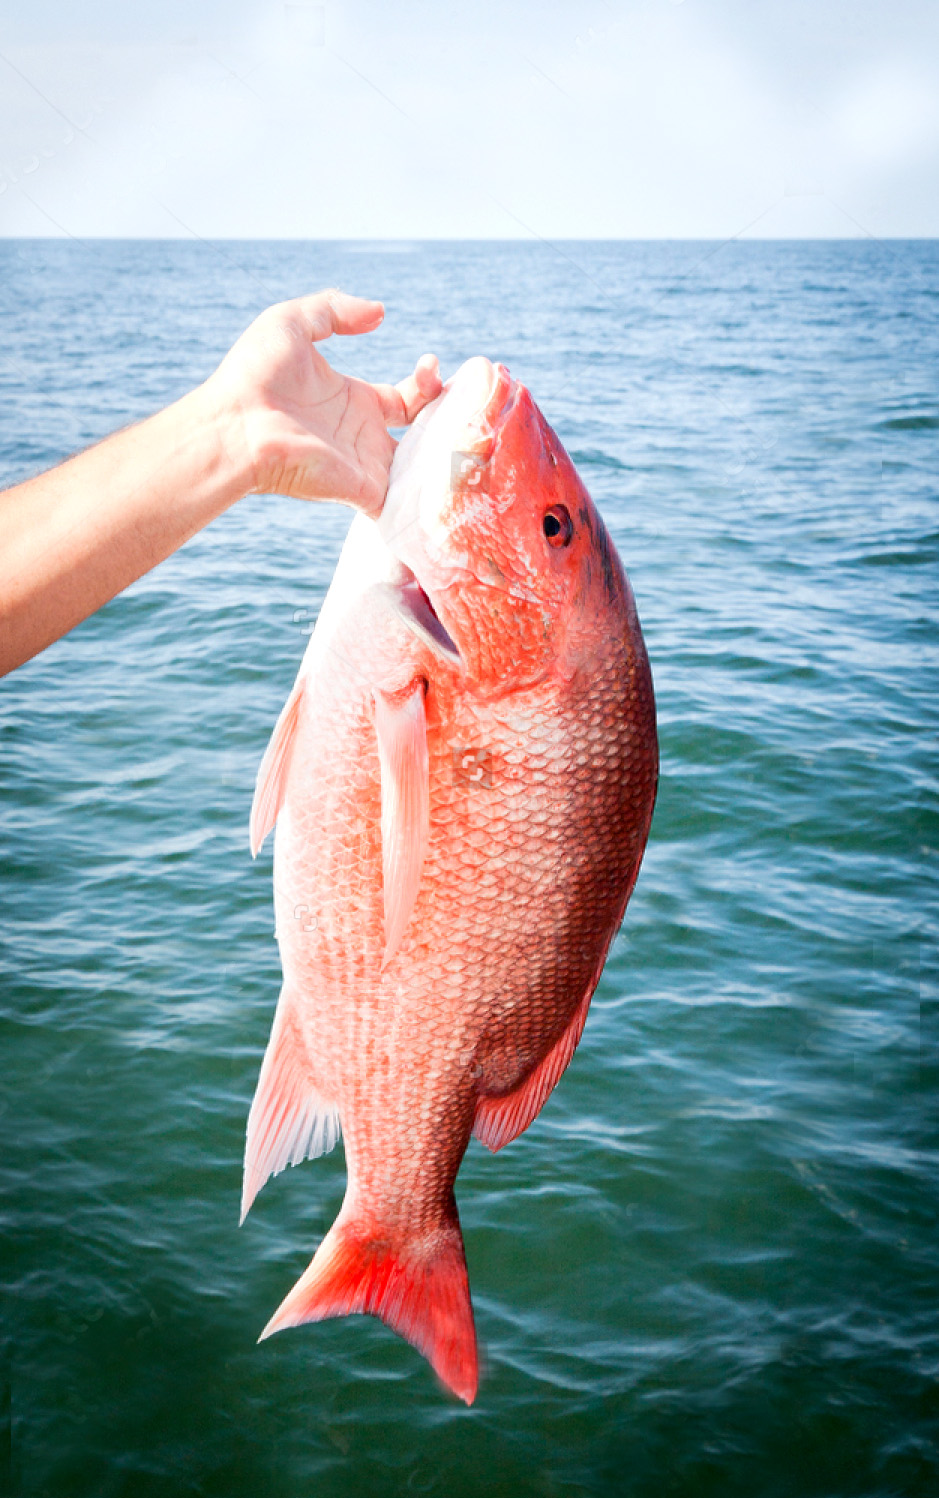 Red Snapper Fish at Rs 480/kg, Snapper Fish in Chennai